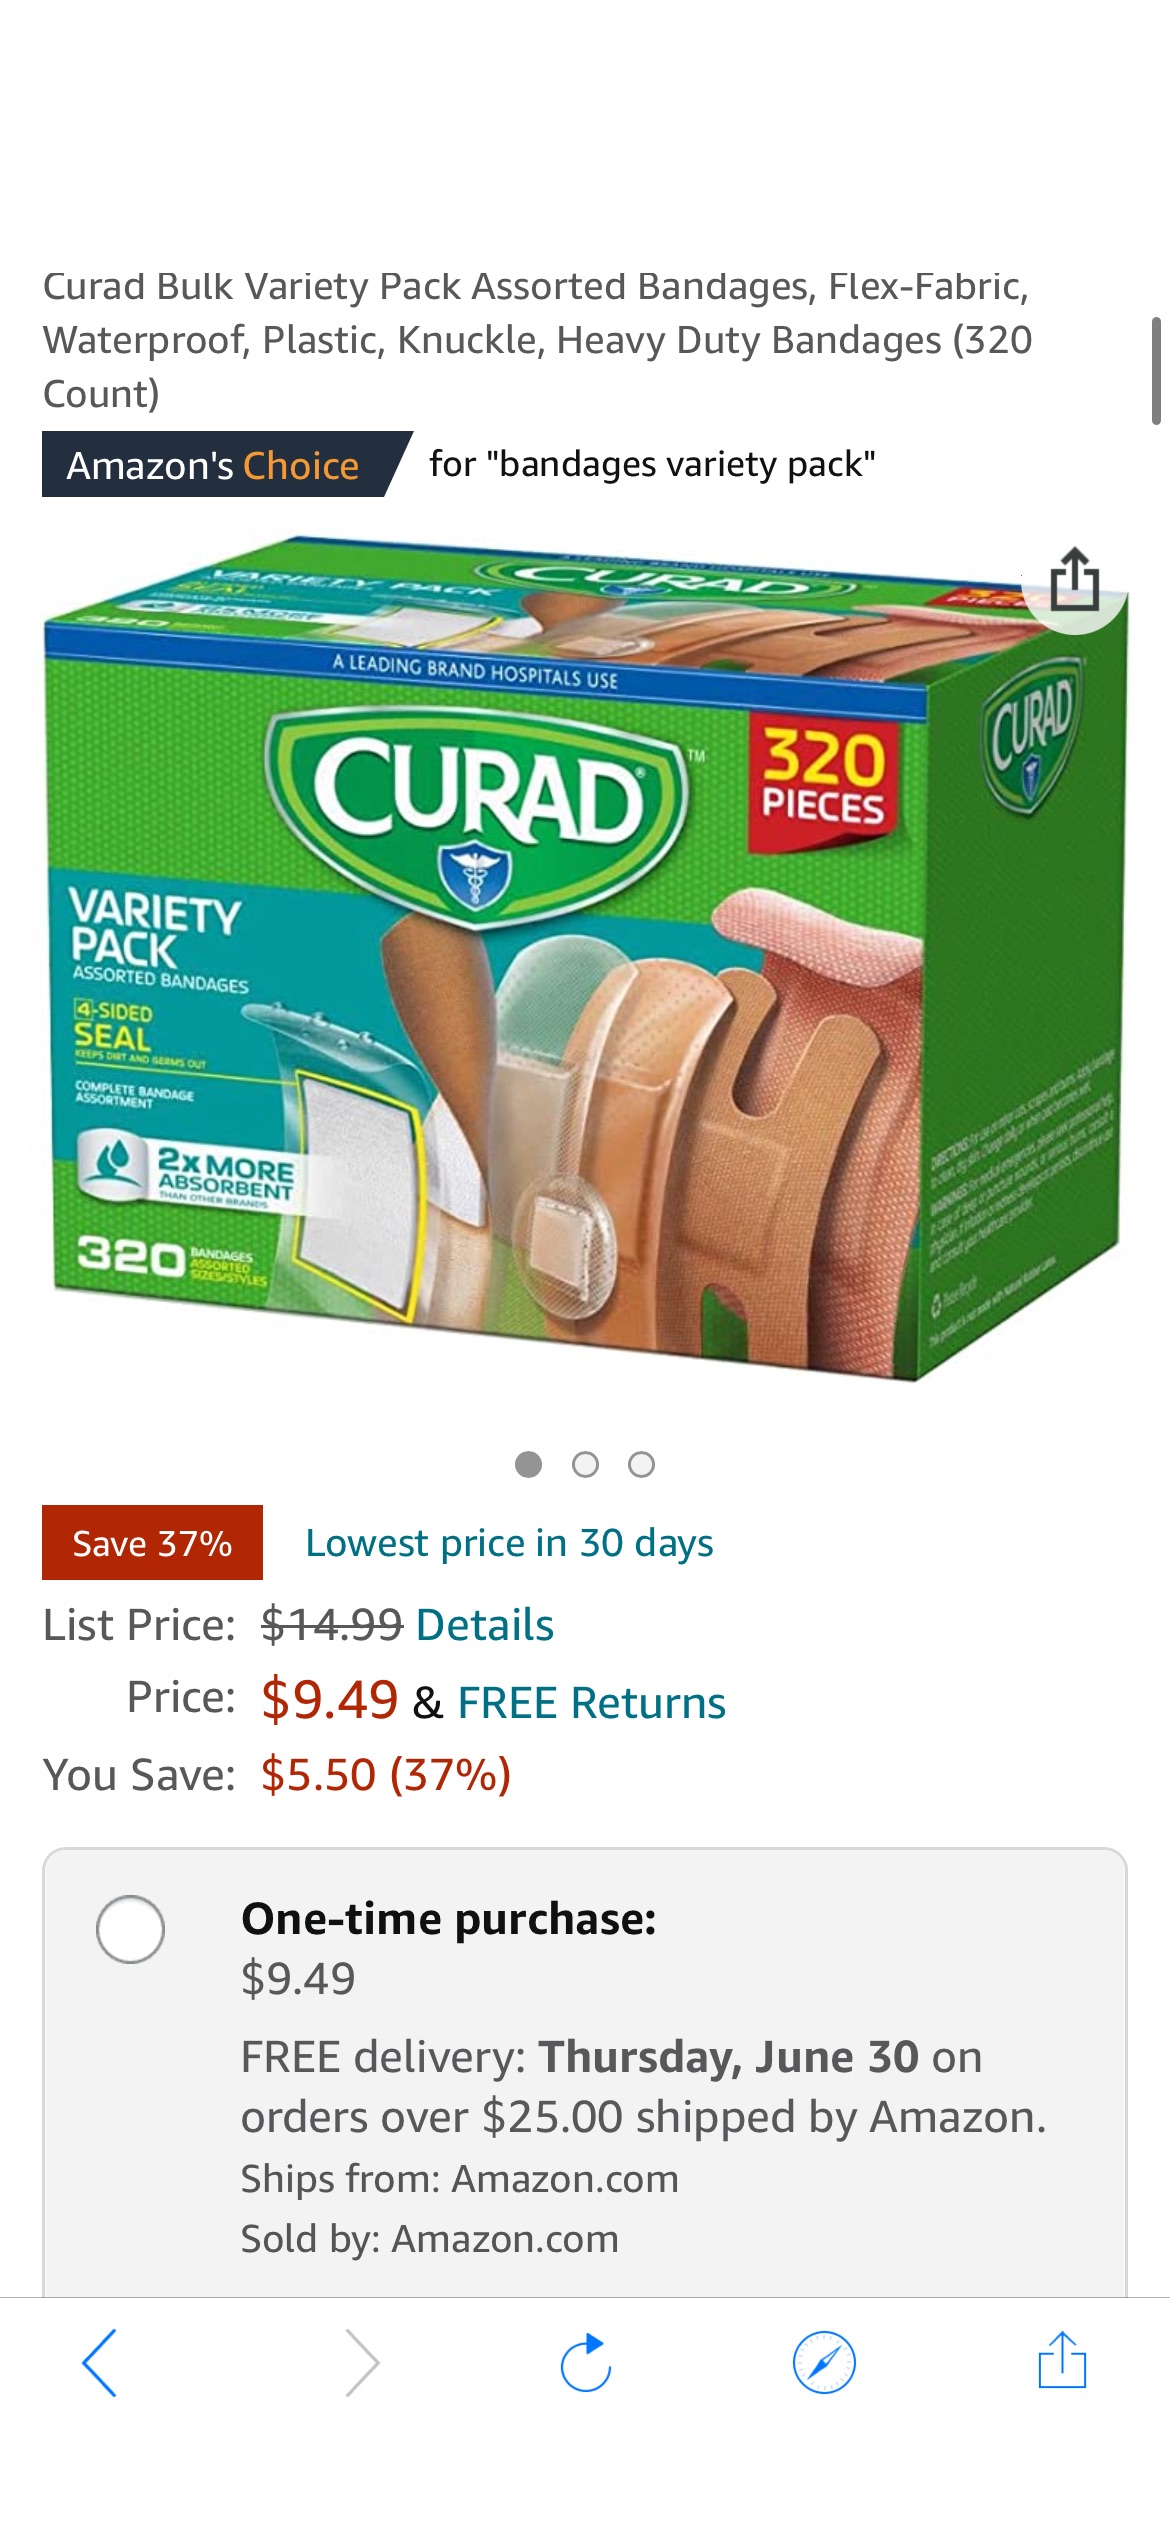 Amazon.com: Curad Bulk Variety Pack Assorted Bandages, Flex-Fabric, Waterproof, Plastic, Knuckle, Heavy Duty Bandages (320 Count) : Health & Household 创口贴